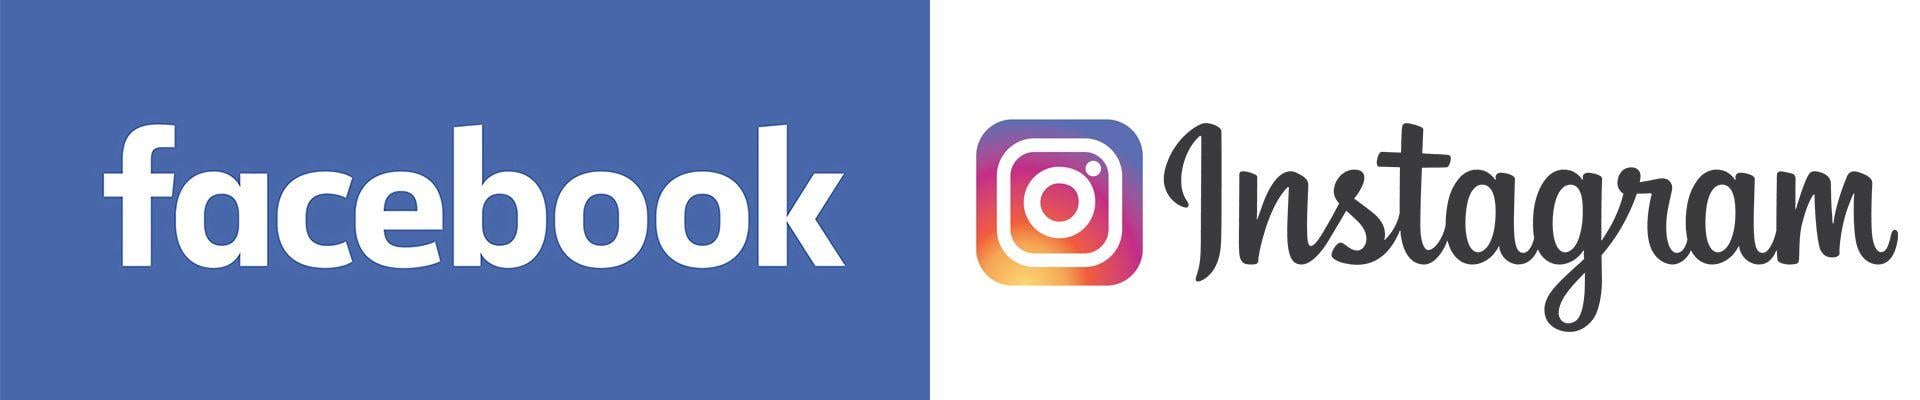 Facebook and Instagram Logo - Follow us on Facebook and Instagram! - Entry Point North